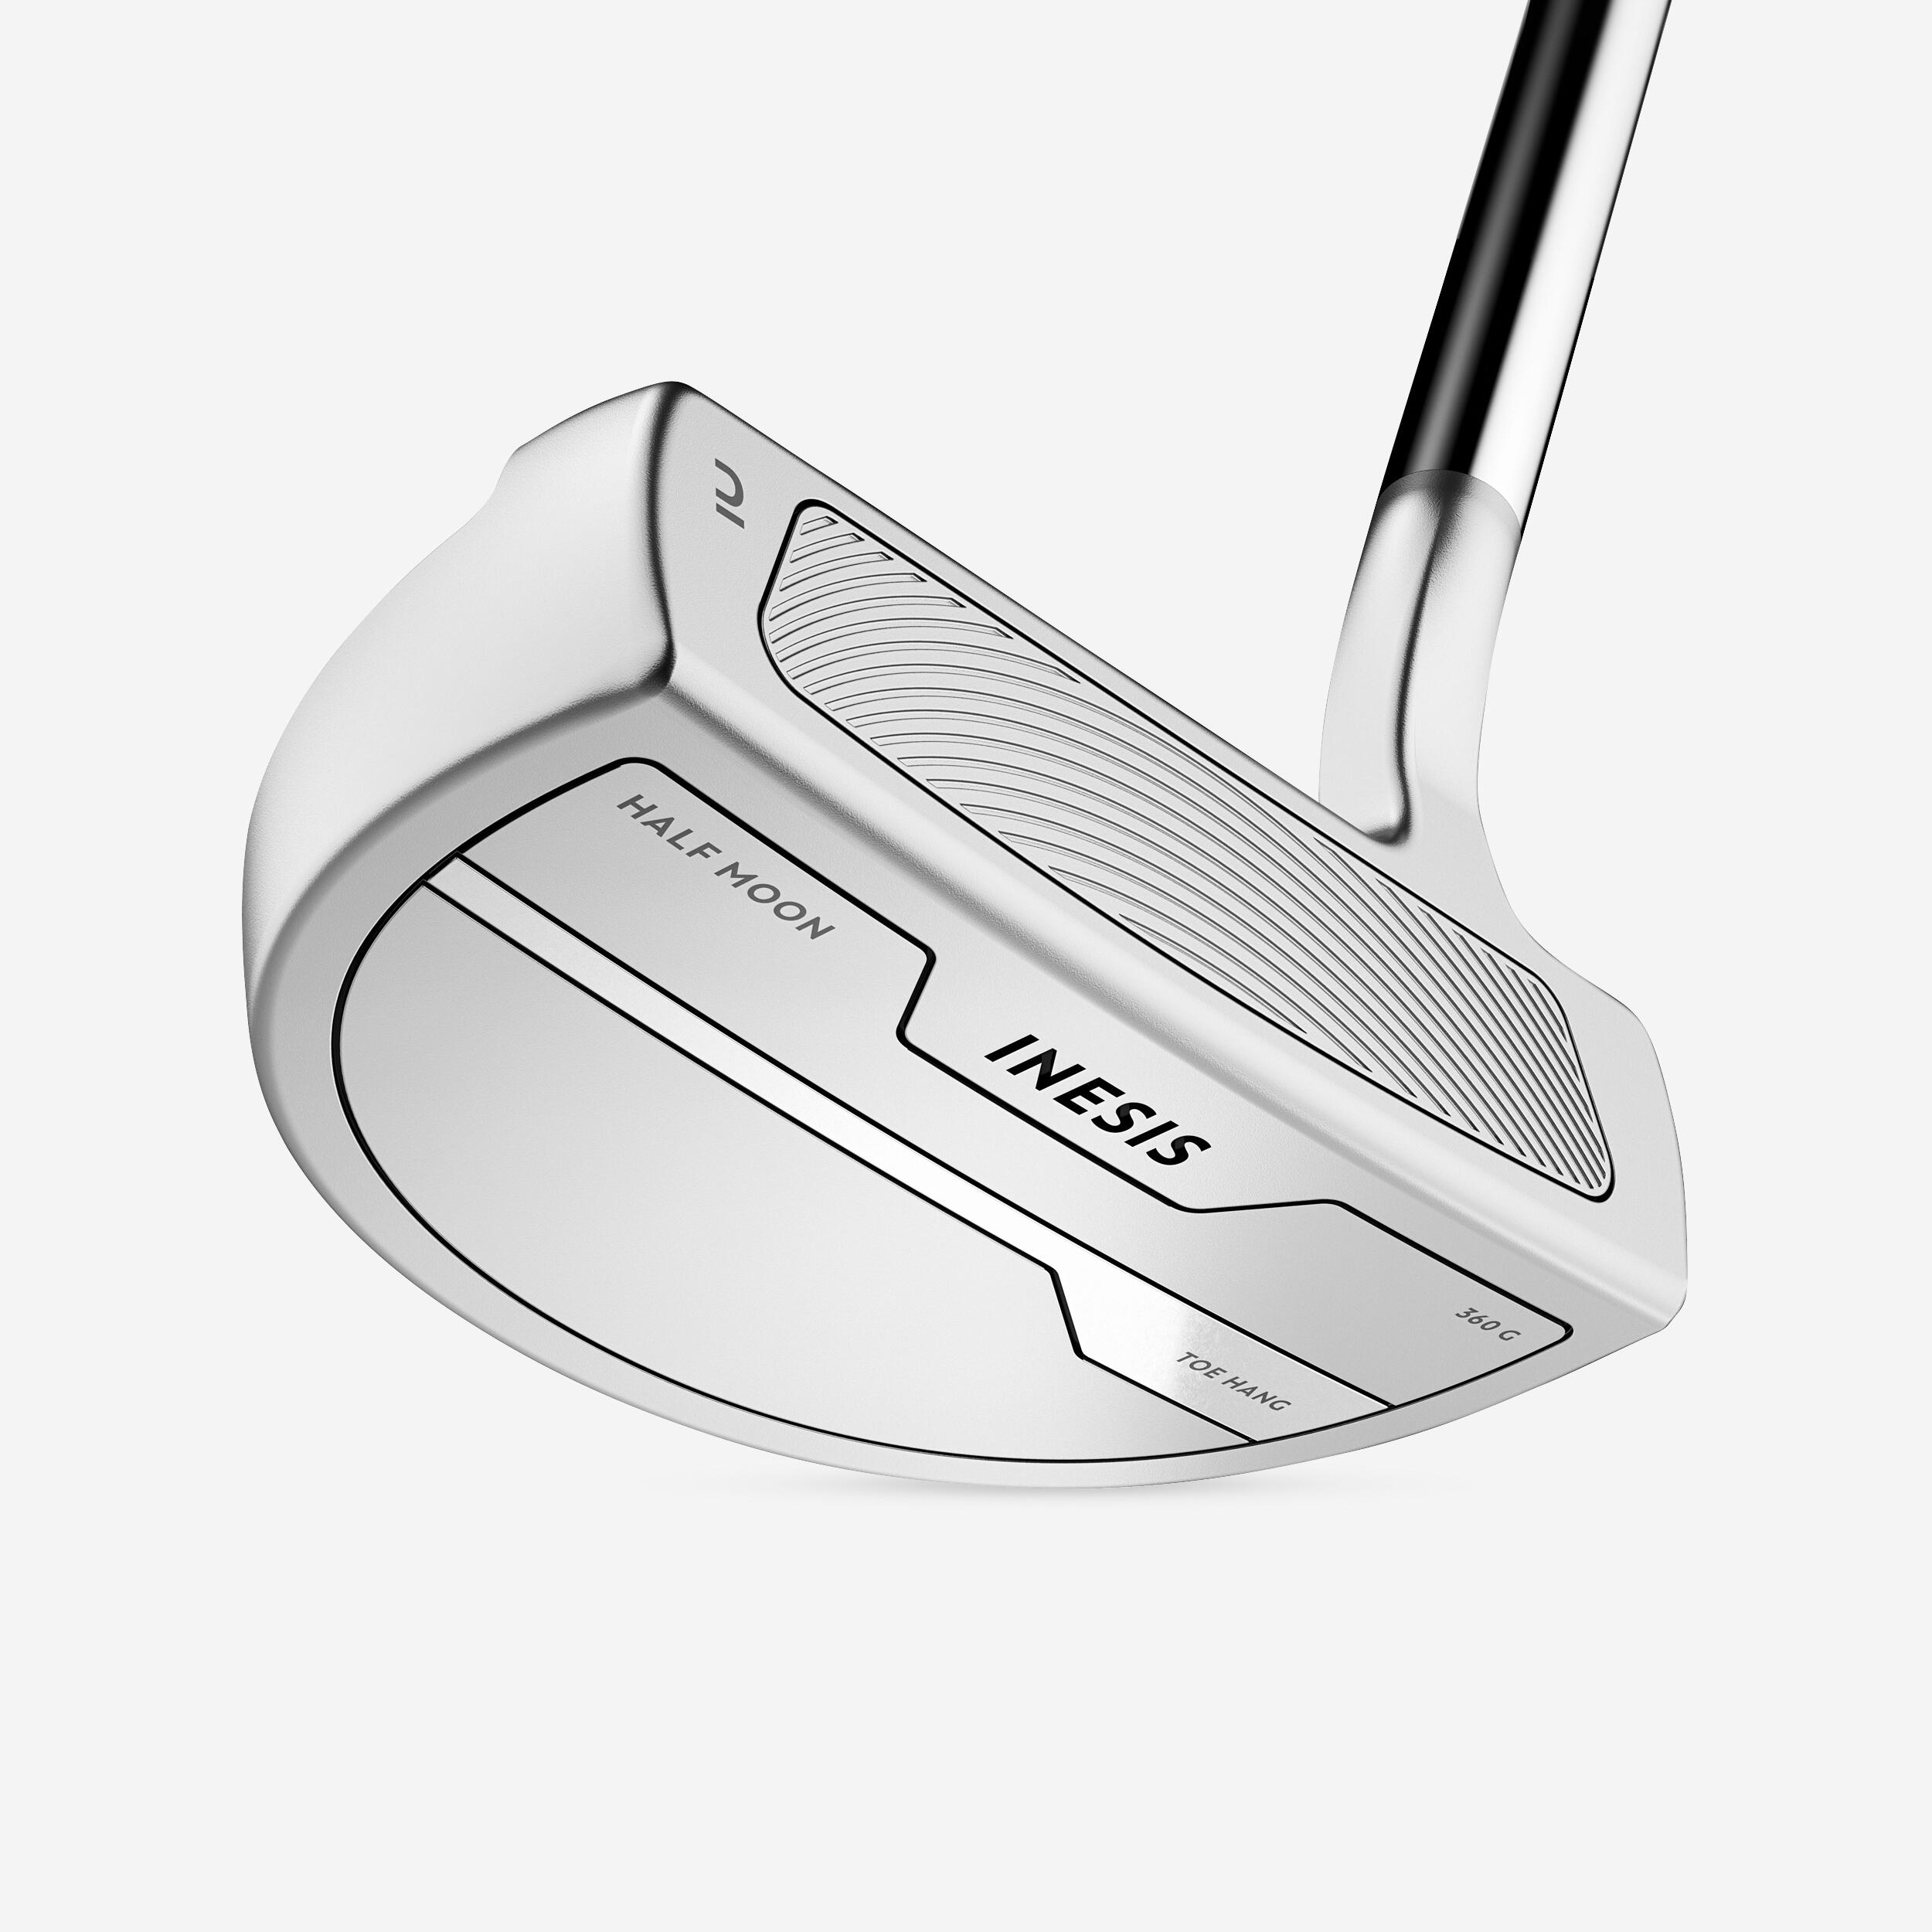 Golf toe hand right handed putter - INESIS half-moon 1/7